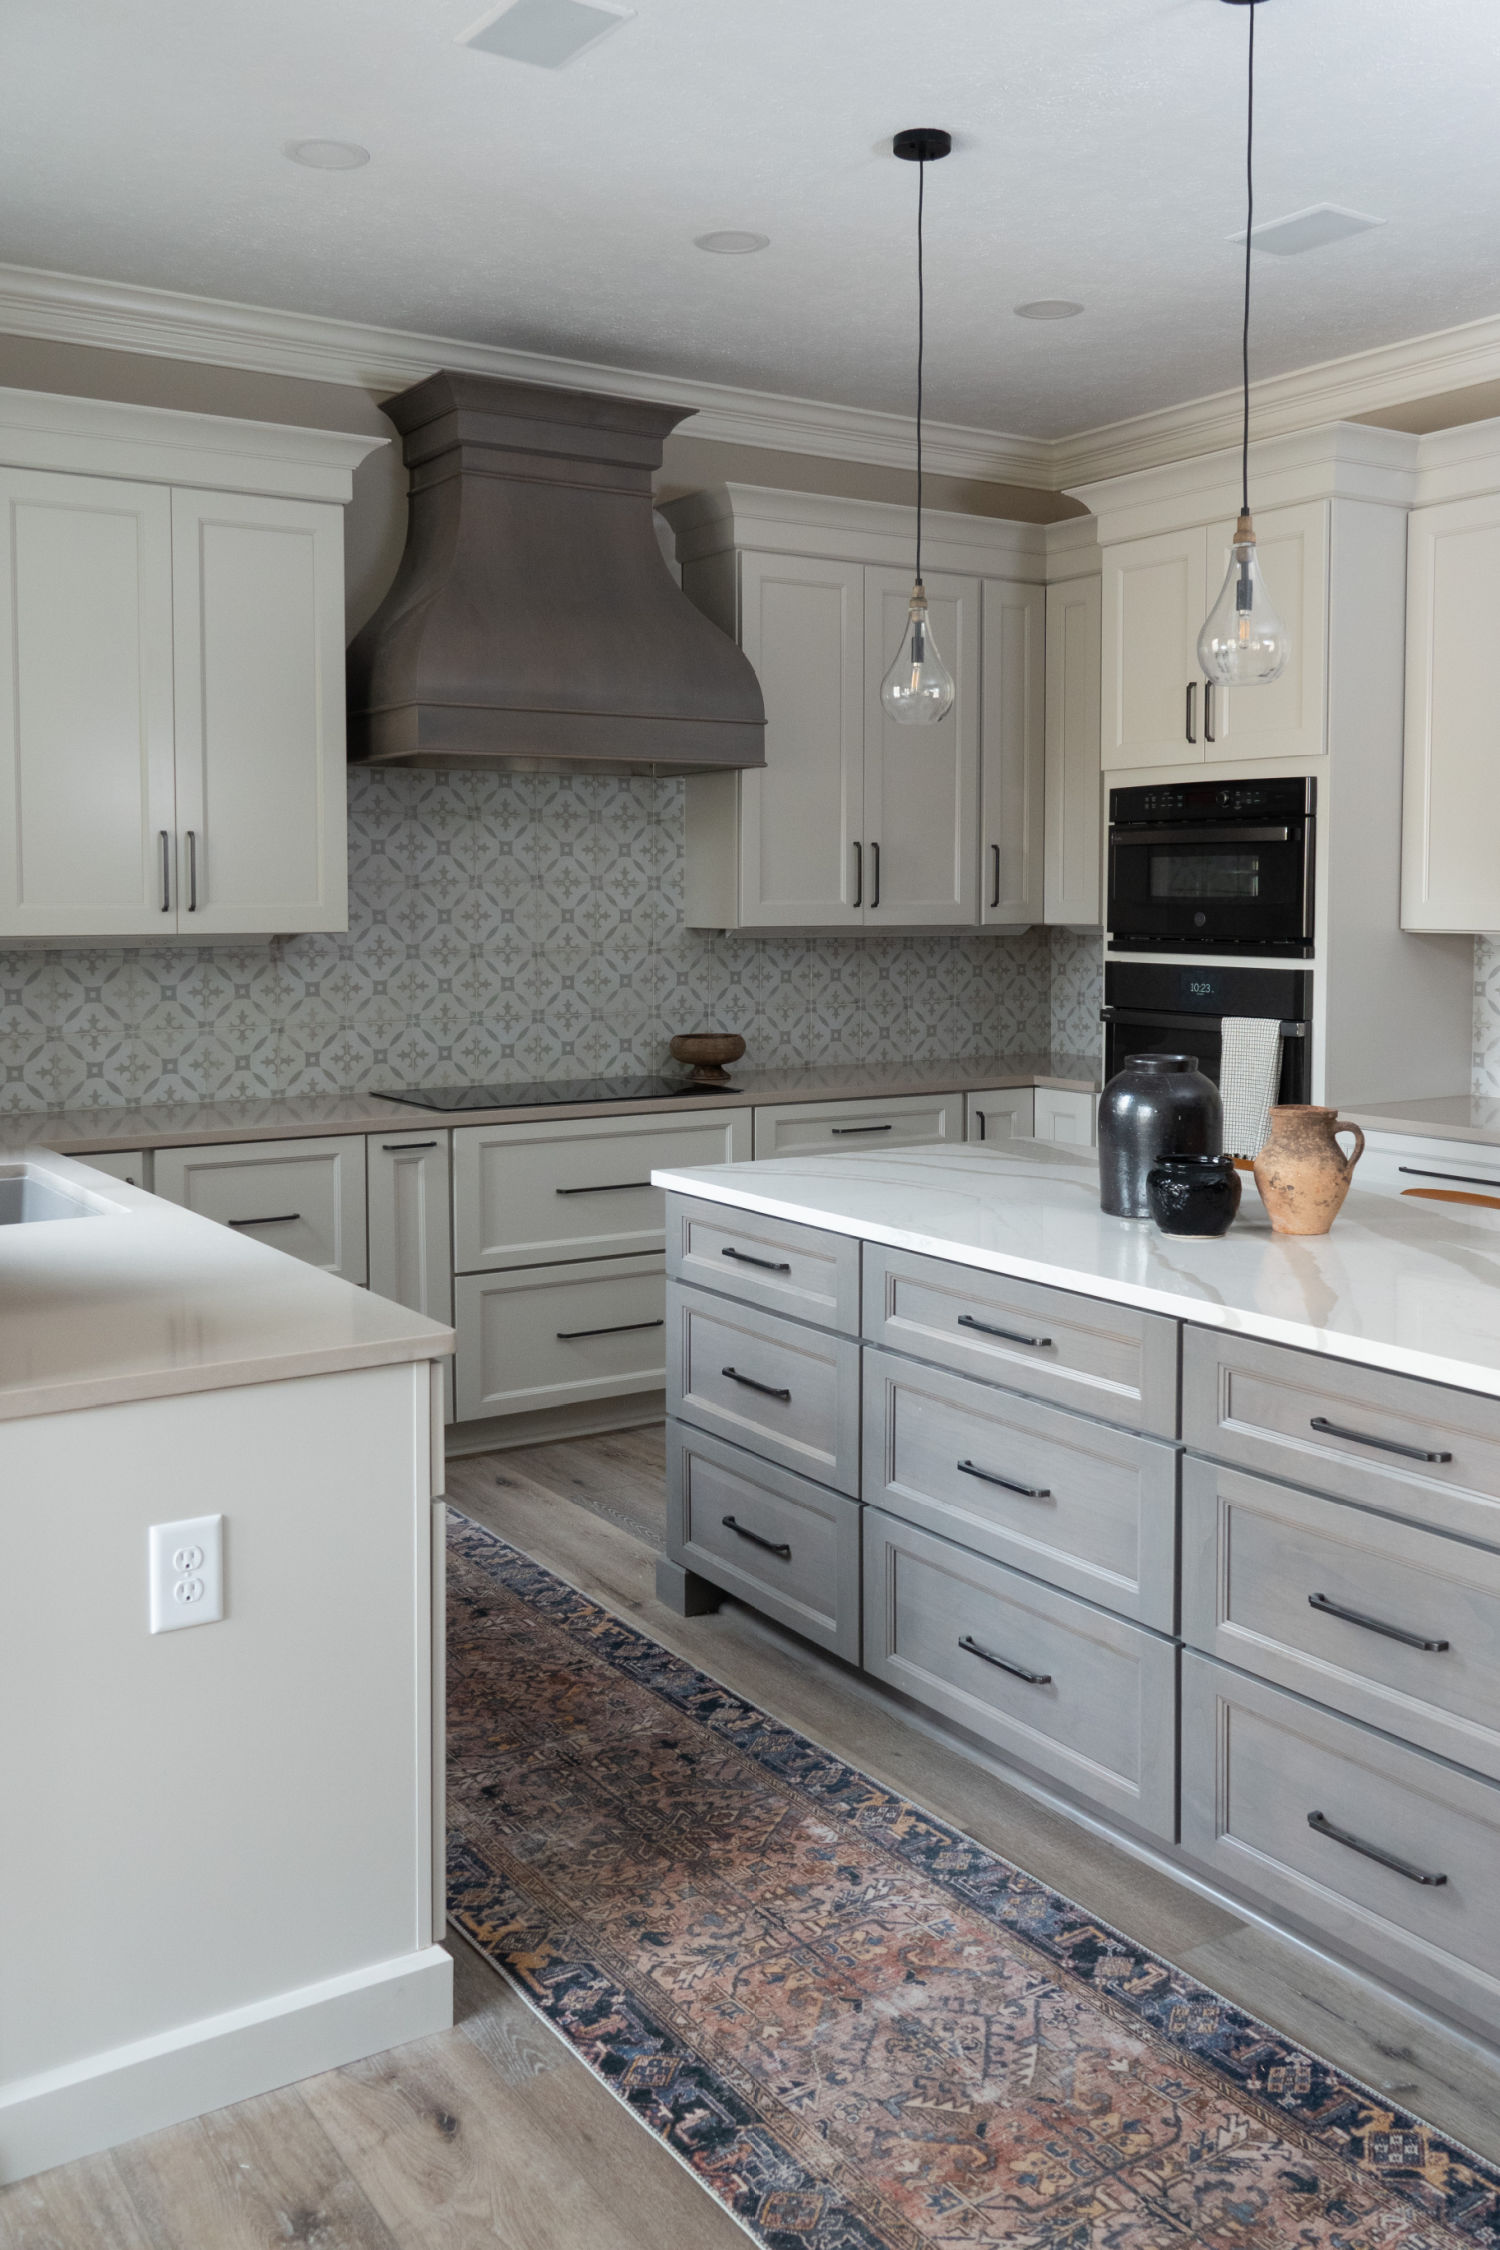 Nicholas Design Build | A remodelled kitchen with white cabinets and gray counter tops.